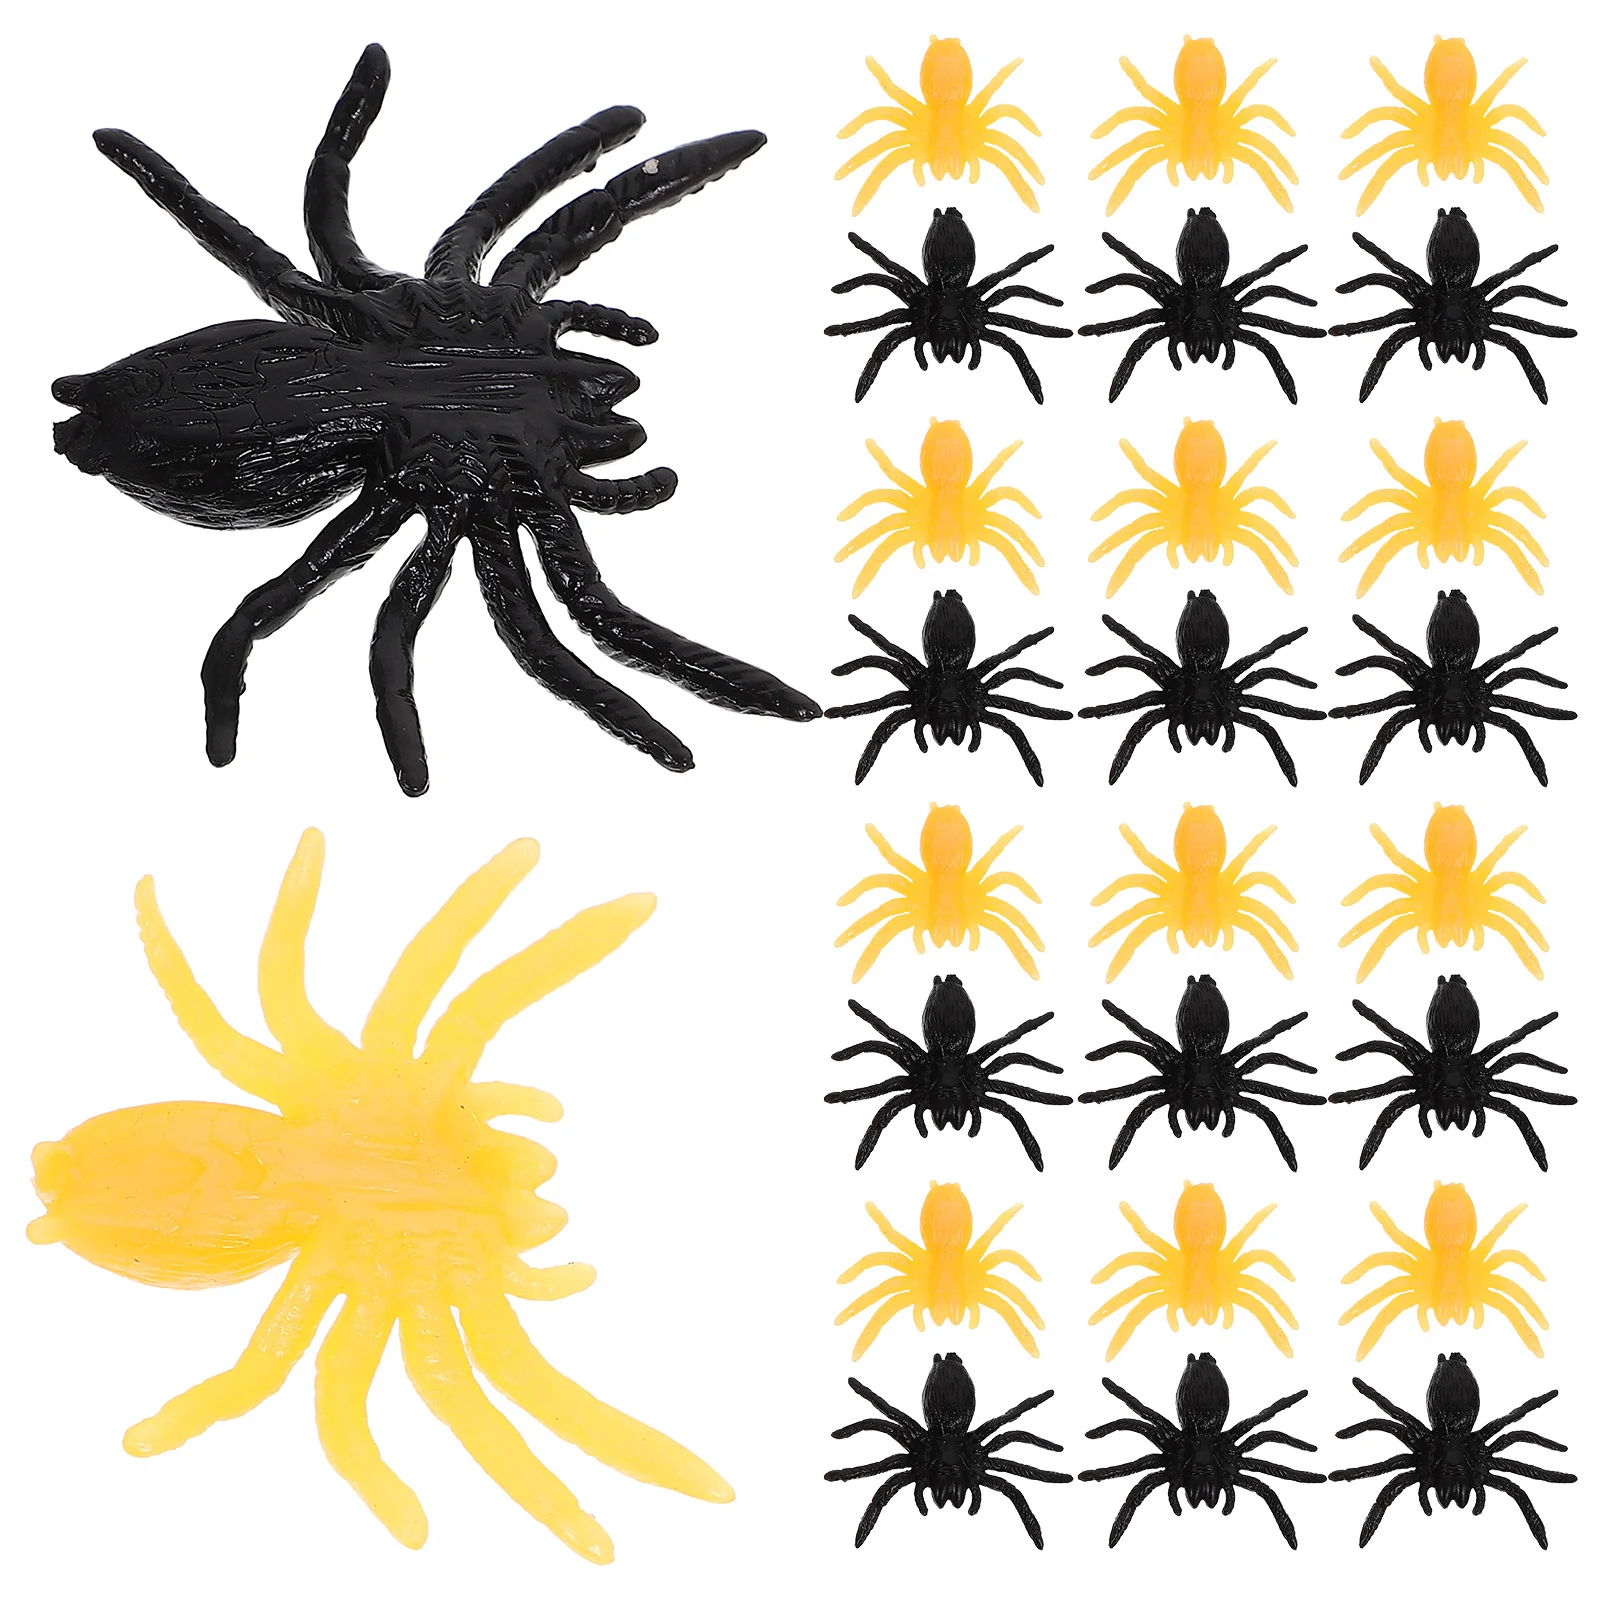 

100 Pcs Fake Spider Decors Props Prank Model Tpr Halloween Simulation Spiders Plaything